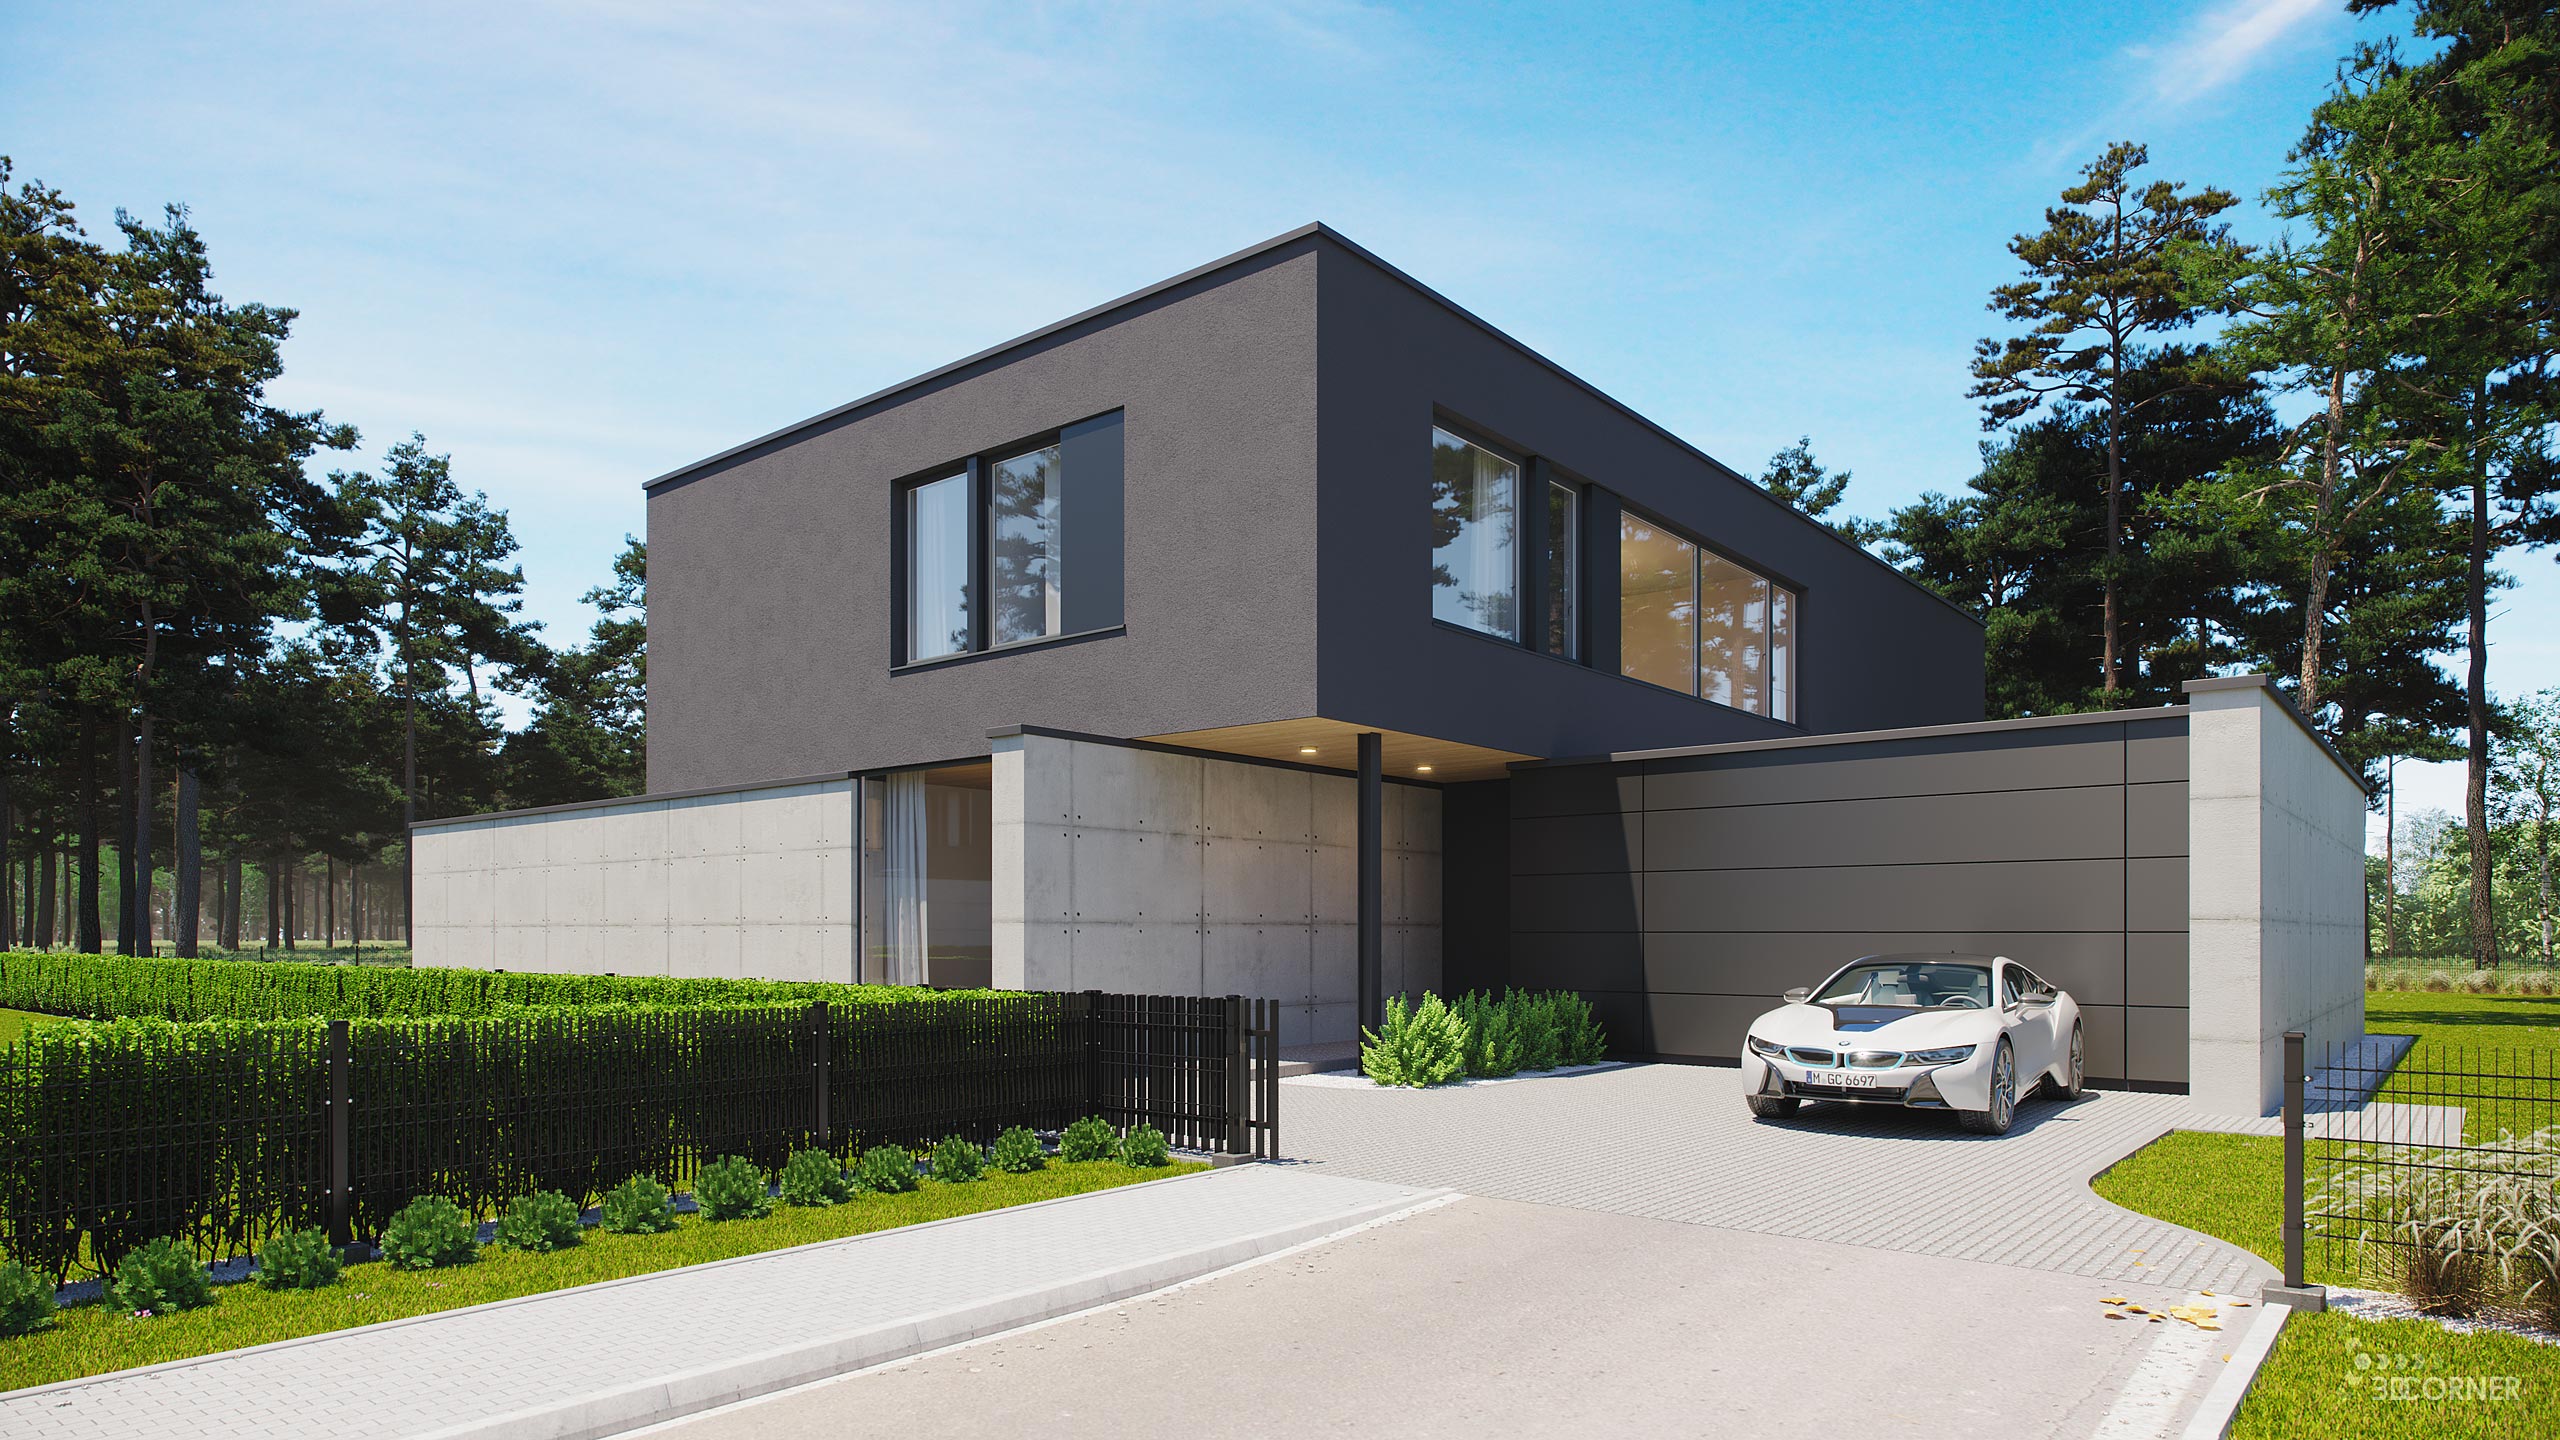 Exterior architecture visualization of modern residential houses by 3D Corner.